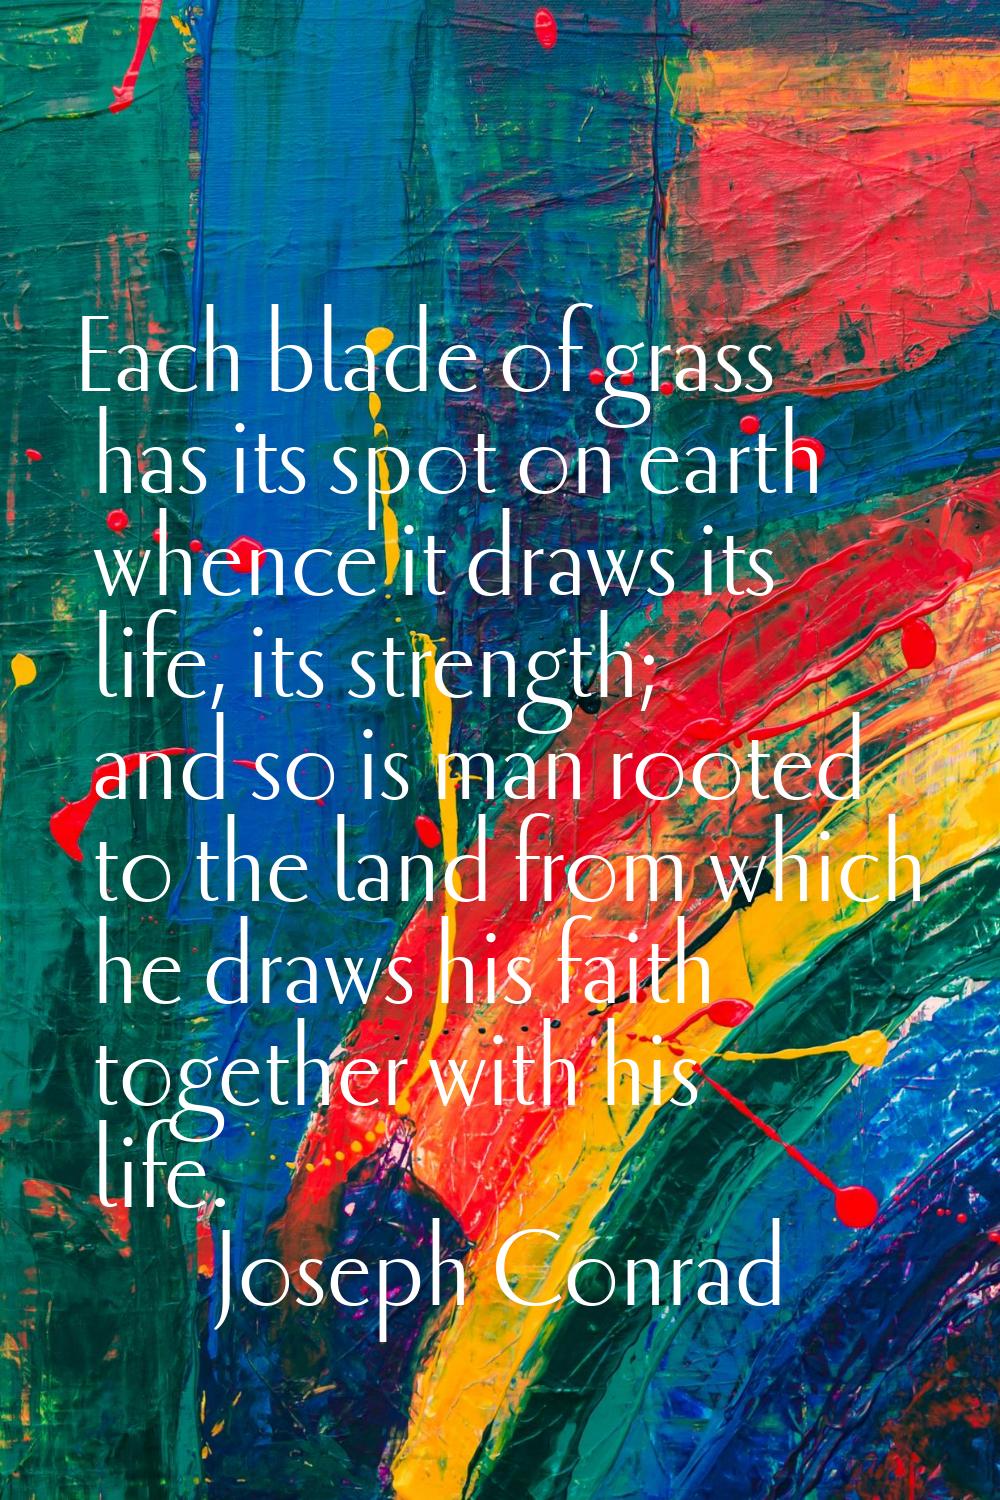 Each blade of grass has its spot on earth whence it draws its life, its strength; and so is man roo